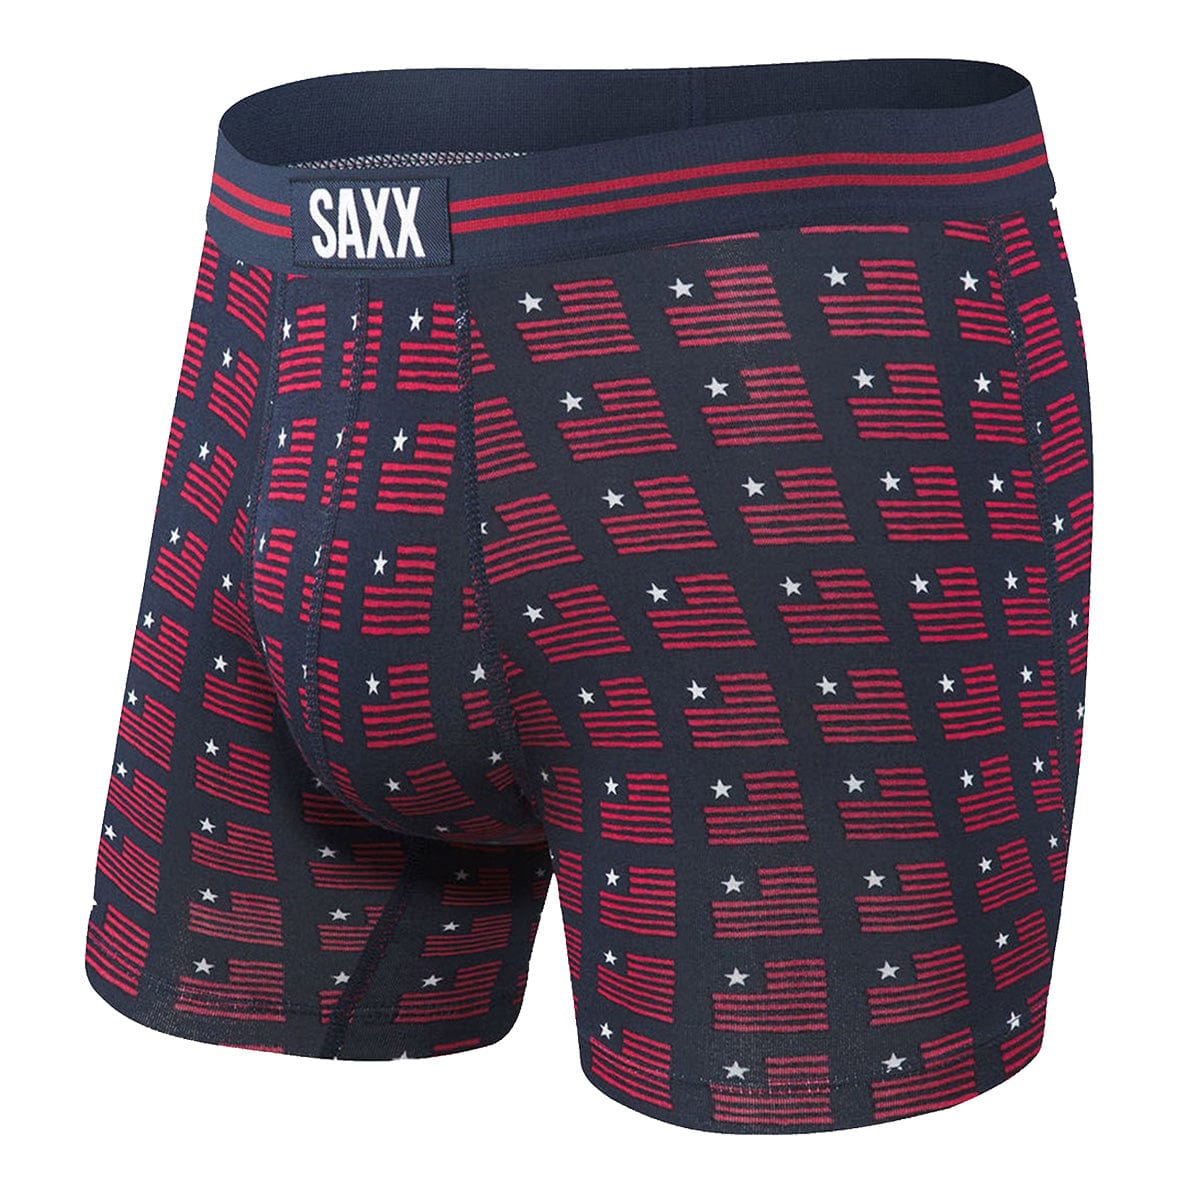 Saxx Vibe Boxers - Navy American Spirit - The Hockey Shop Source For Sports